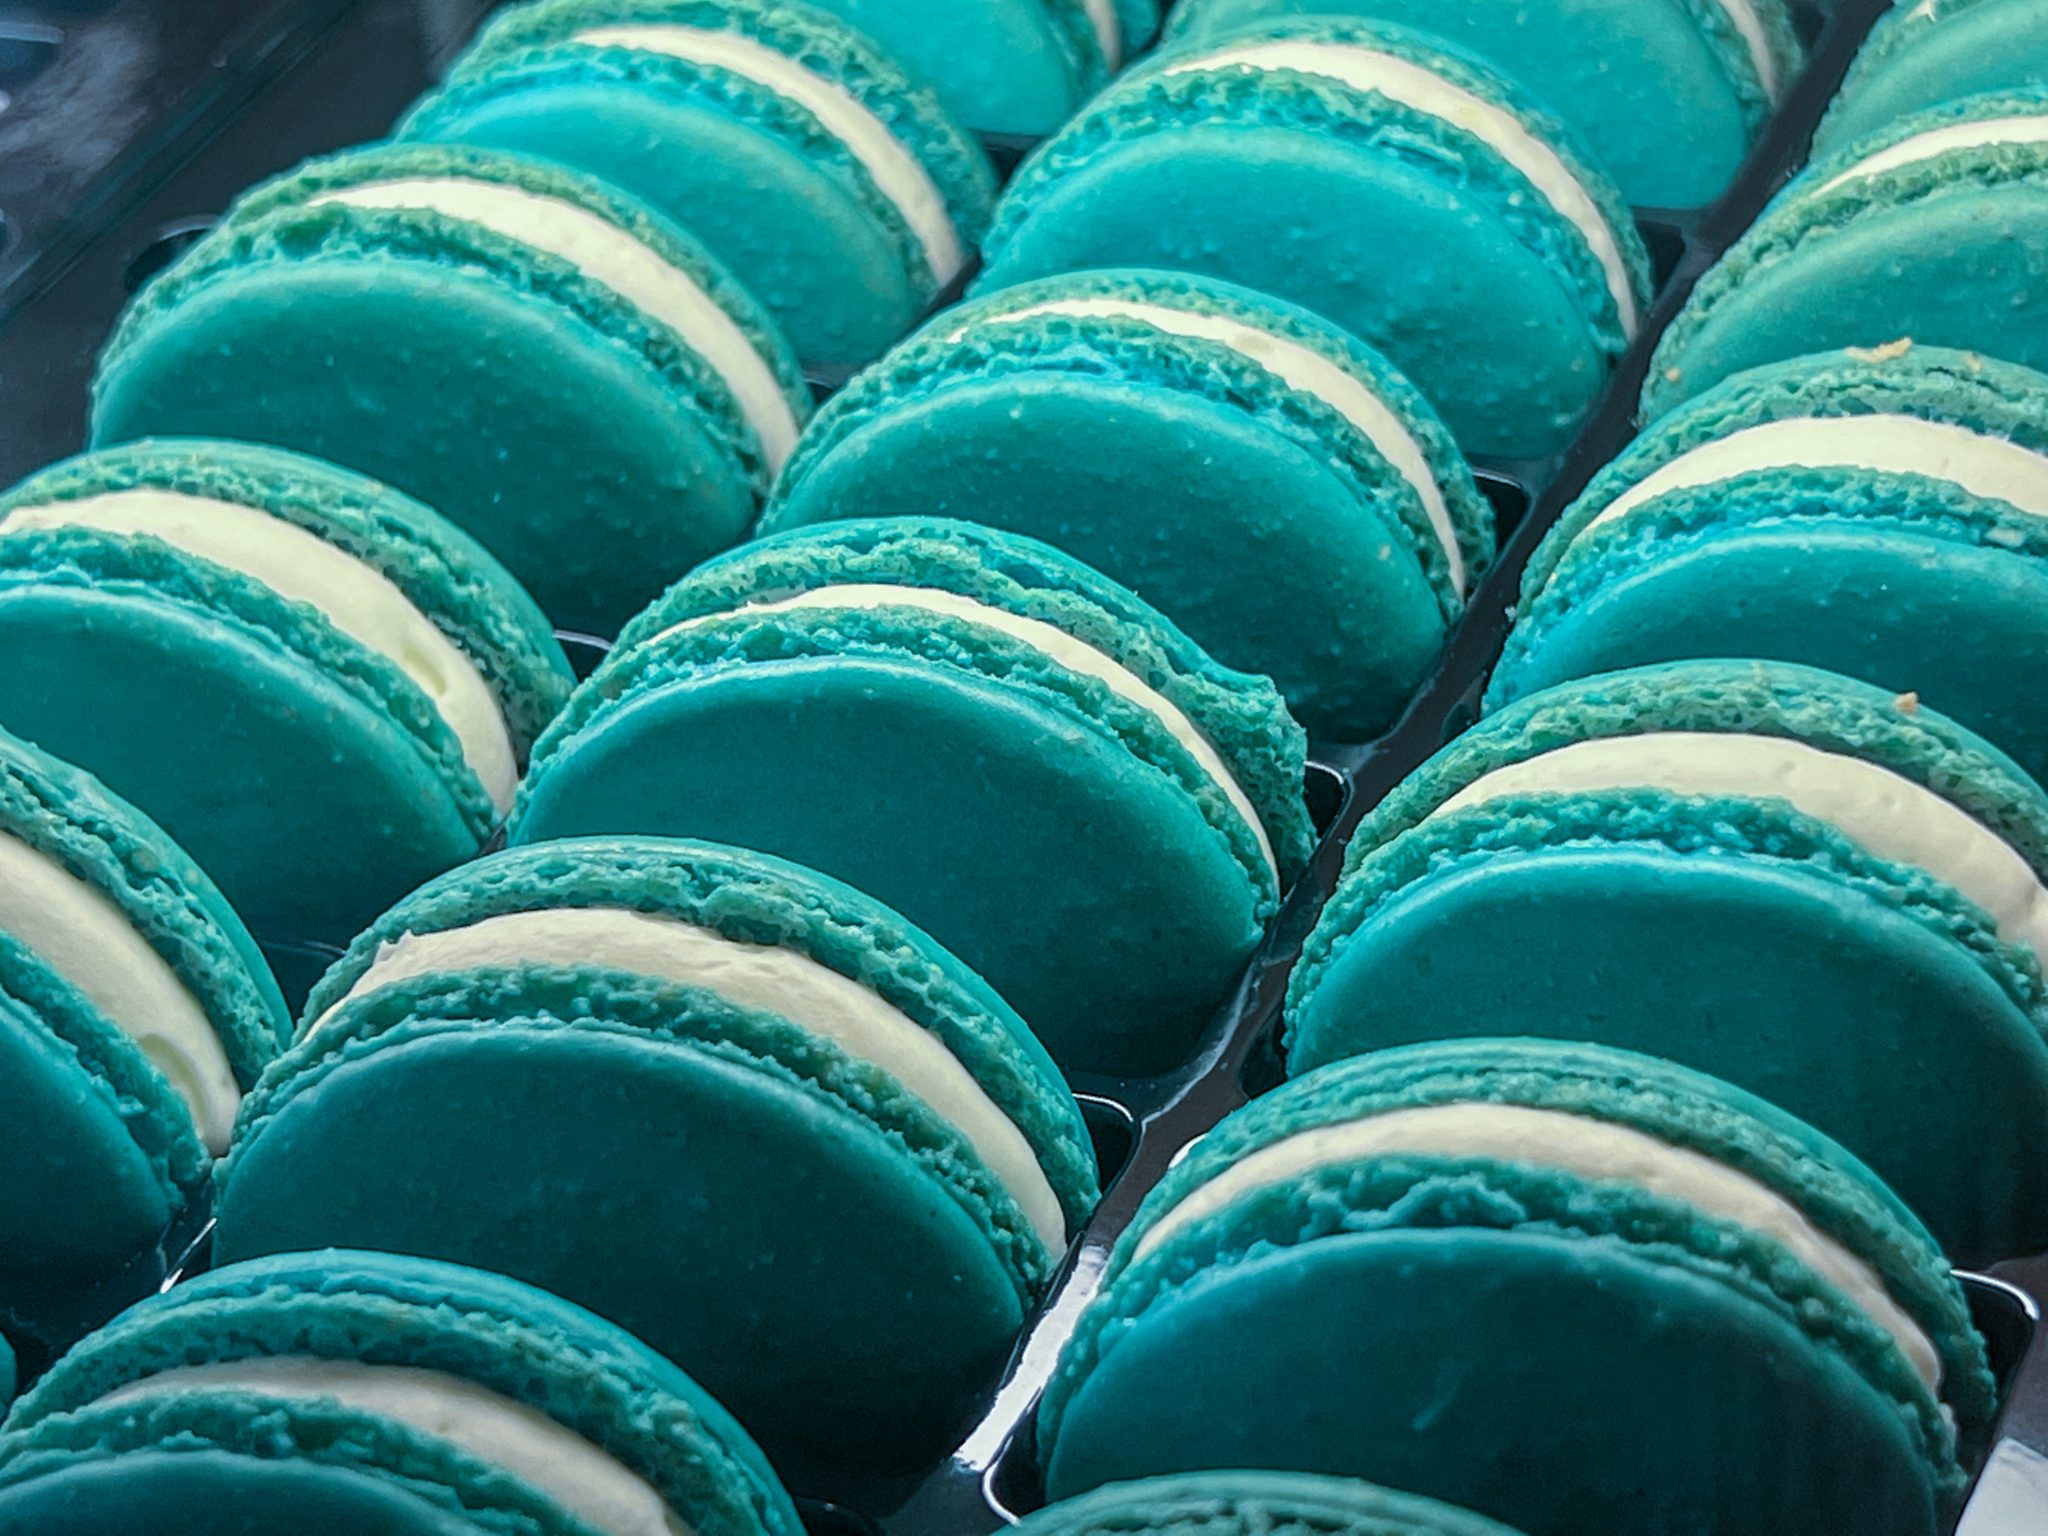 Three rows of teal macarons